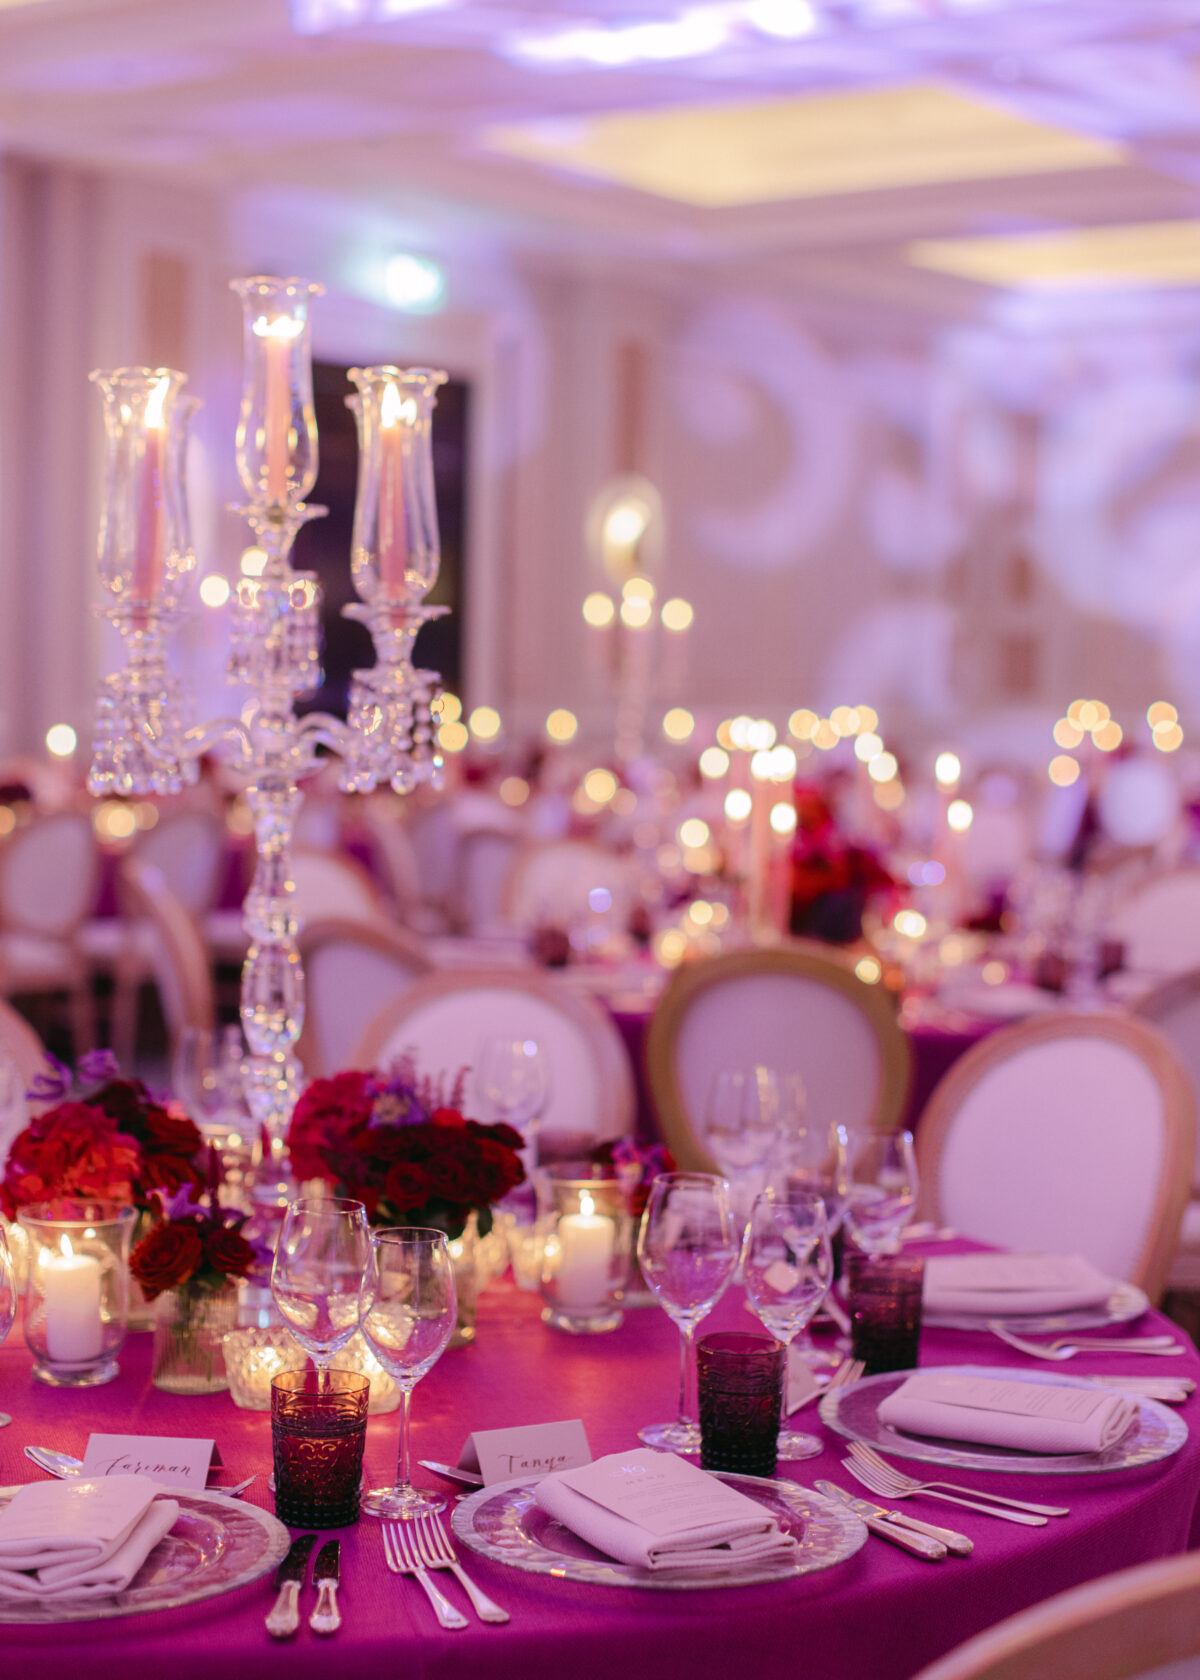 Luxury Weddings & Events Planner ballroom image pink, red and purple theming and flowers